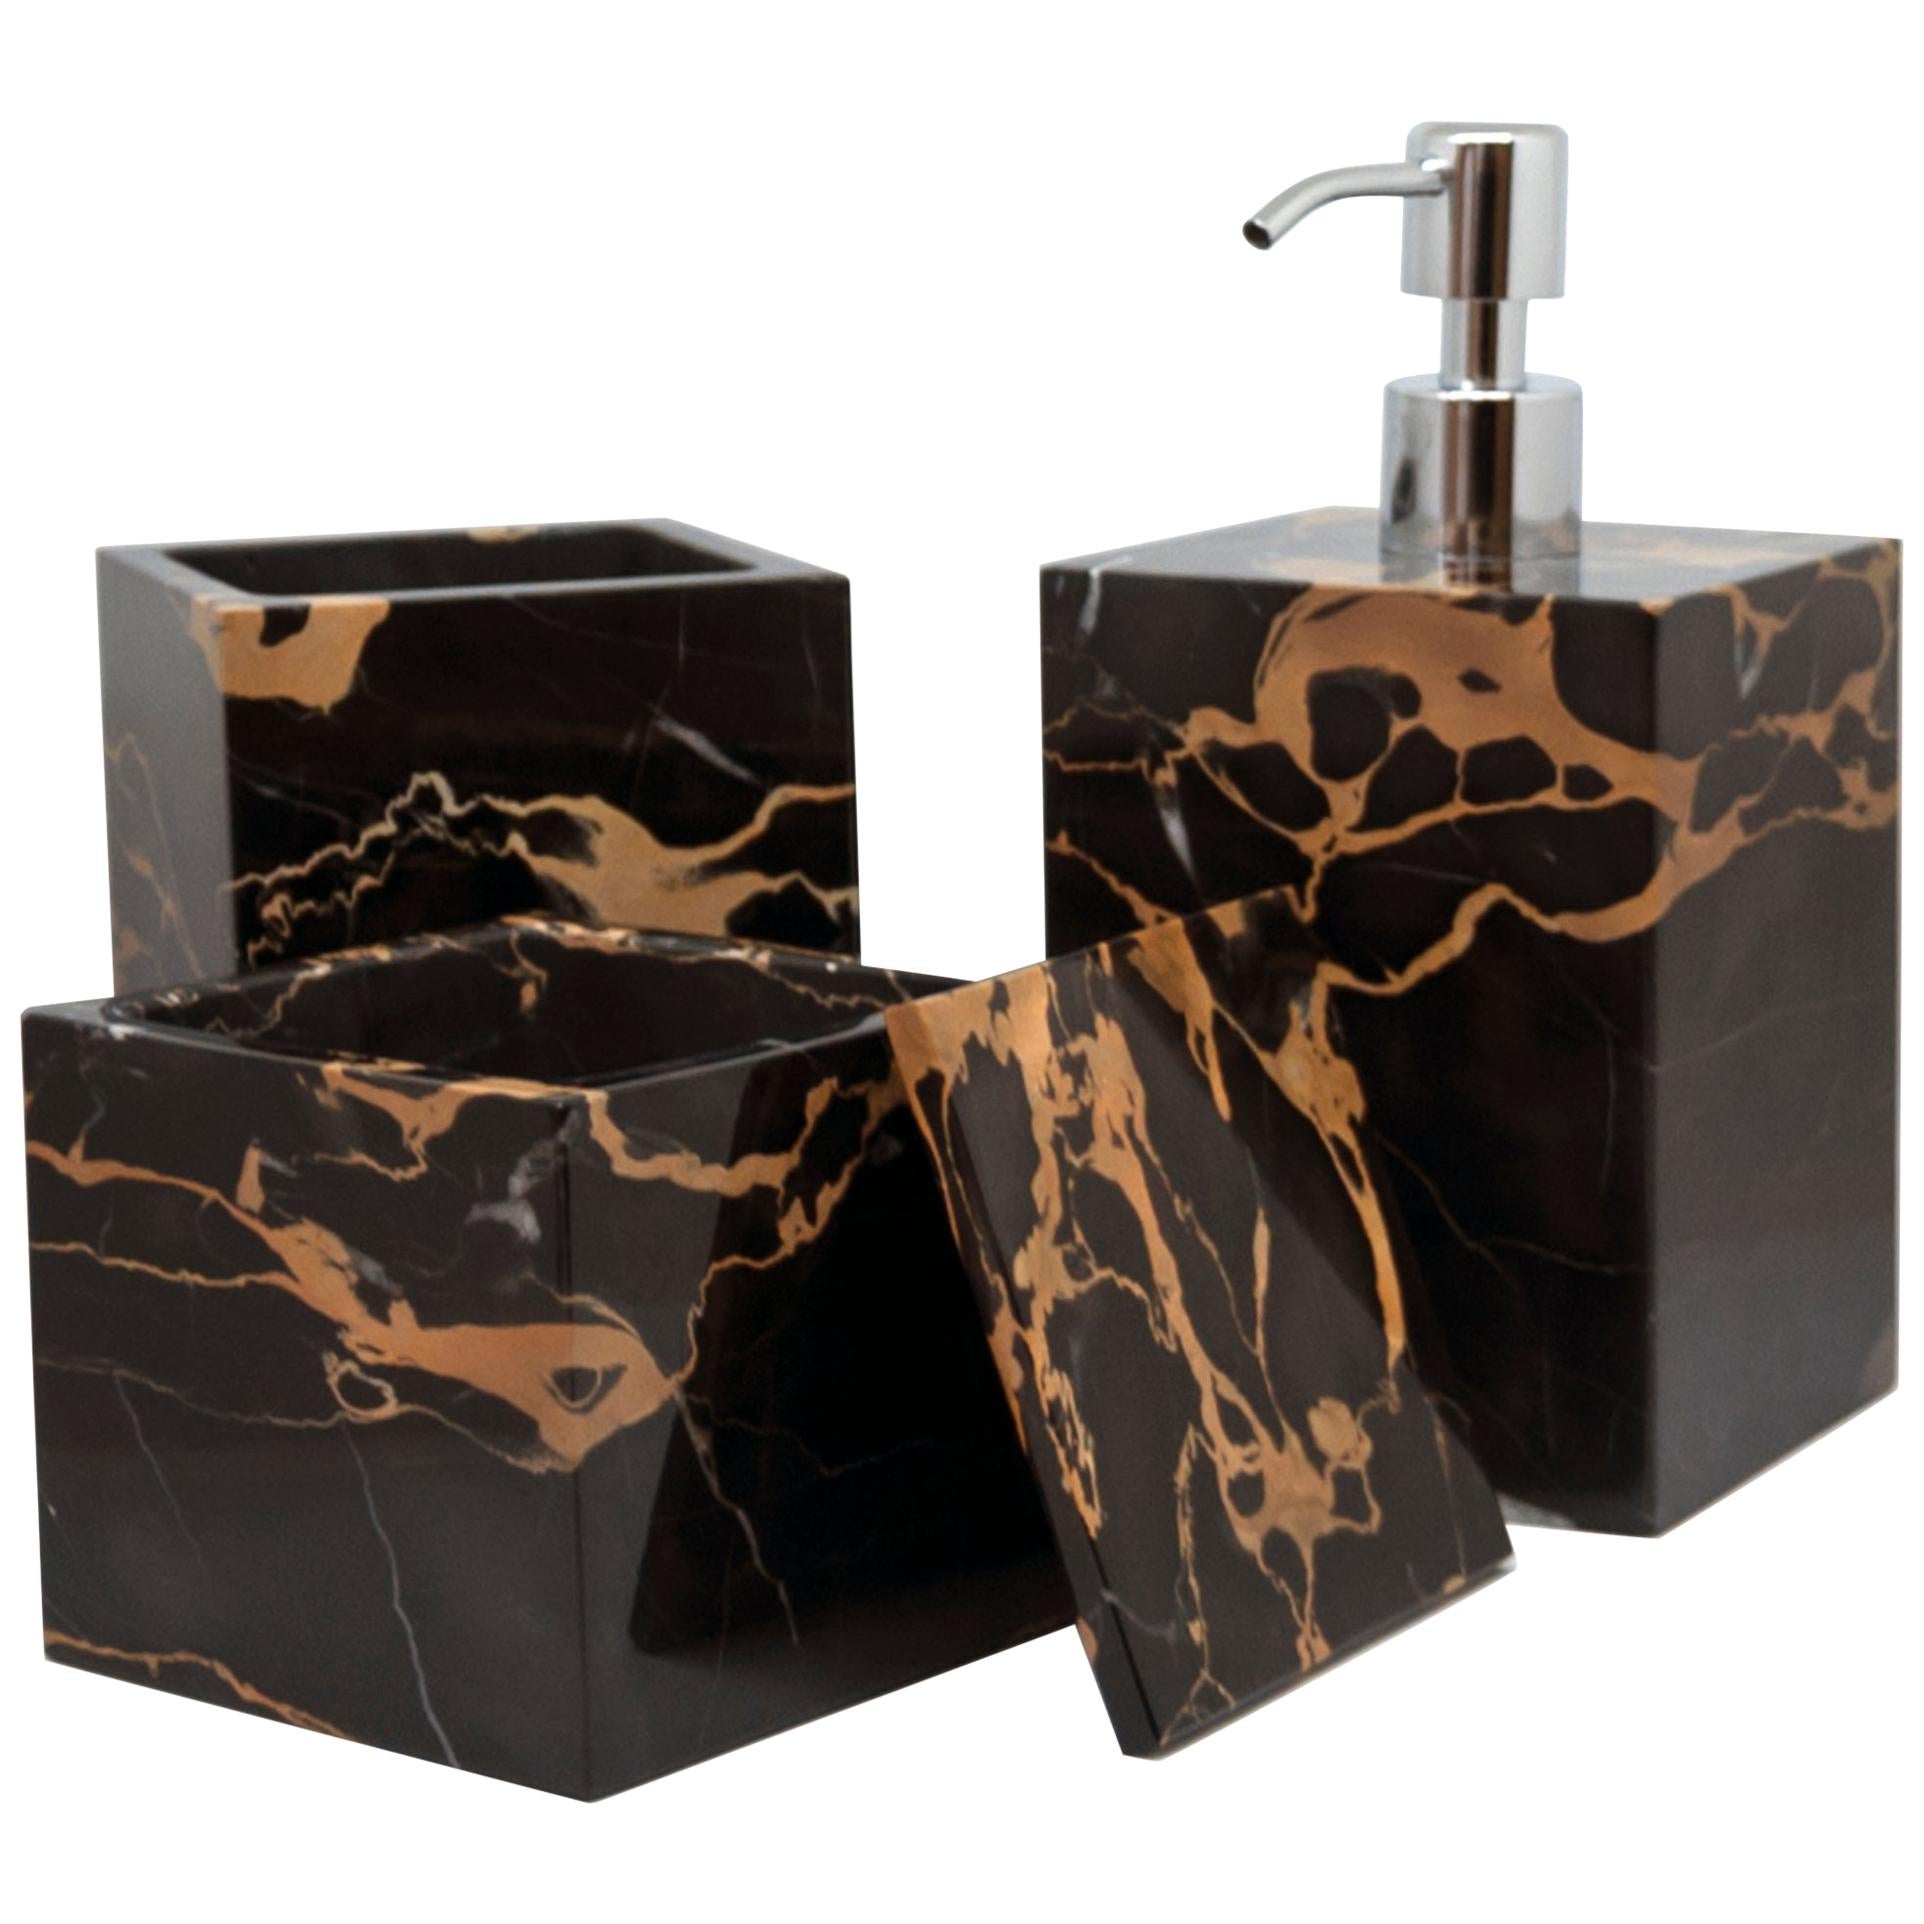 A luxury squared toothbrush holder in the rare and beautiful Portoro marble characterised by black color base and golden natural veins. Toothbrush holder size 8,5 x 8,5 x 12,5 cm.
Each piece is unique (since each marble block is different in veins